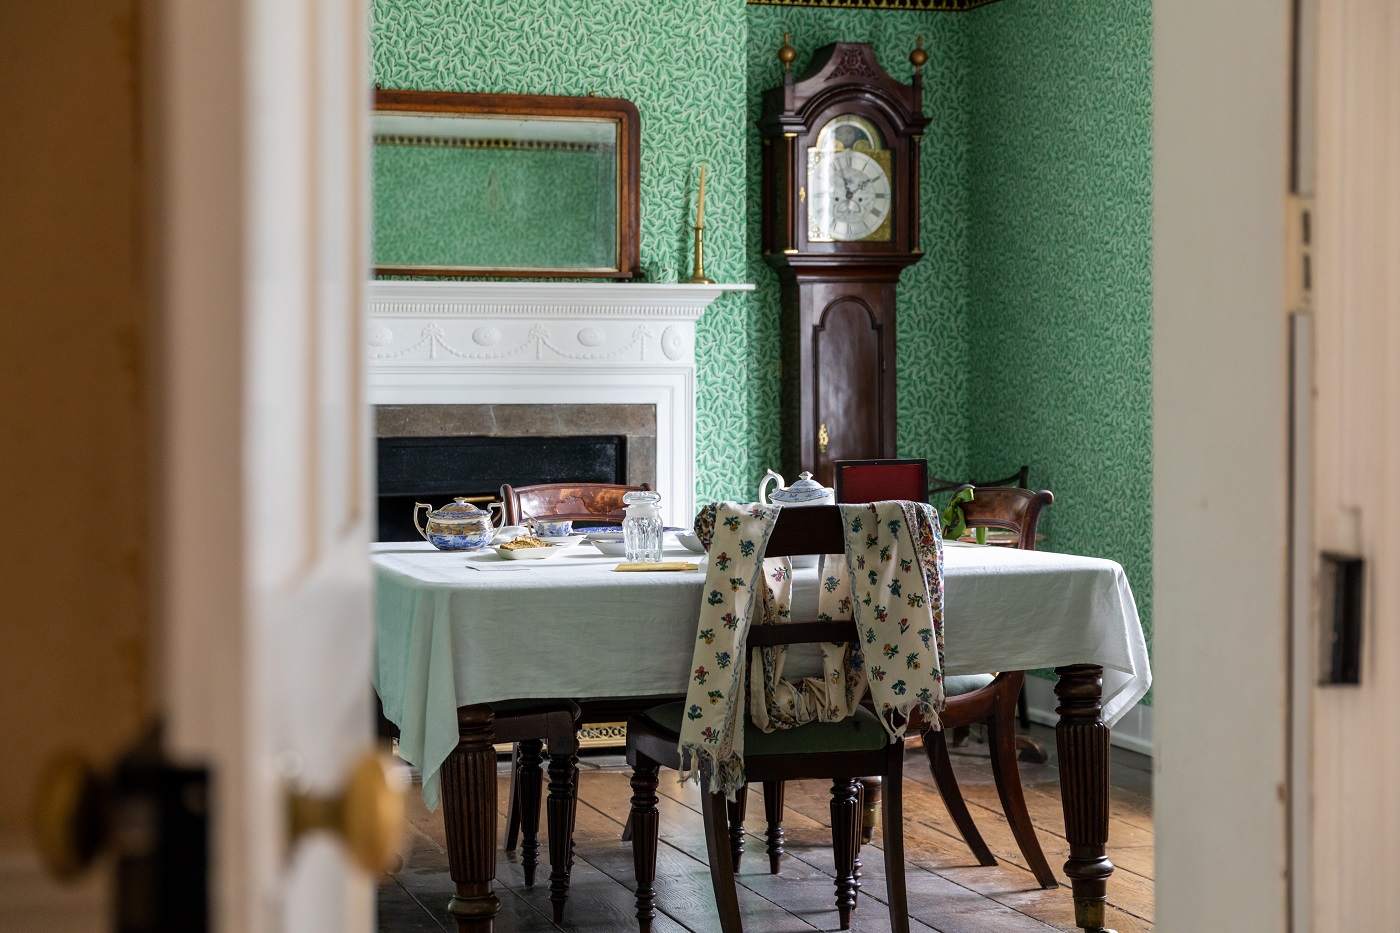 Glimpsing into the Dining Room at Jane Austen's House. Photo by Luke Shears